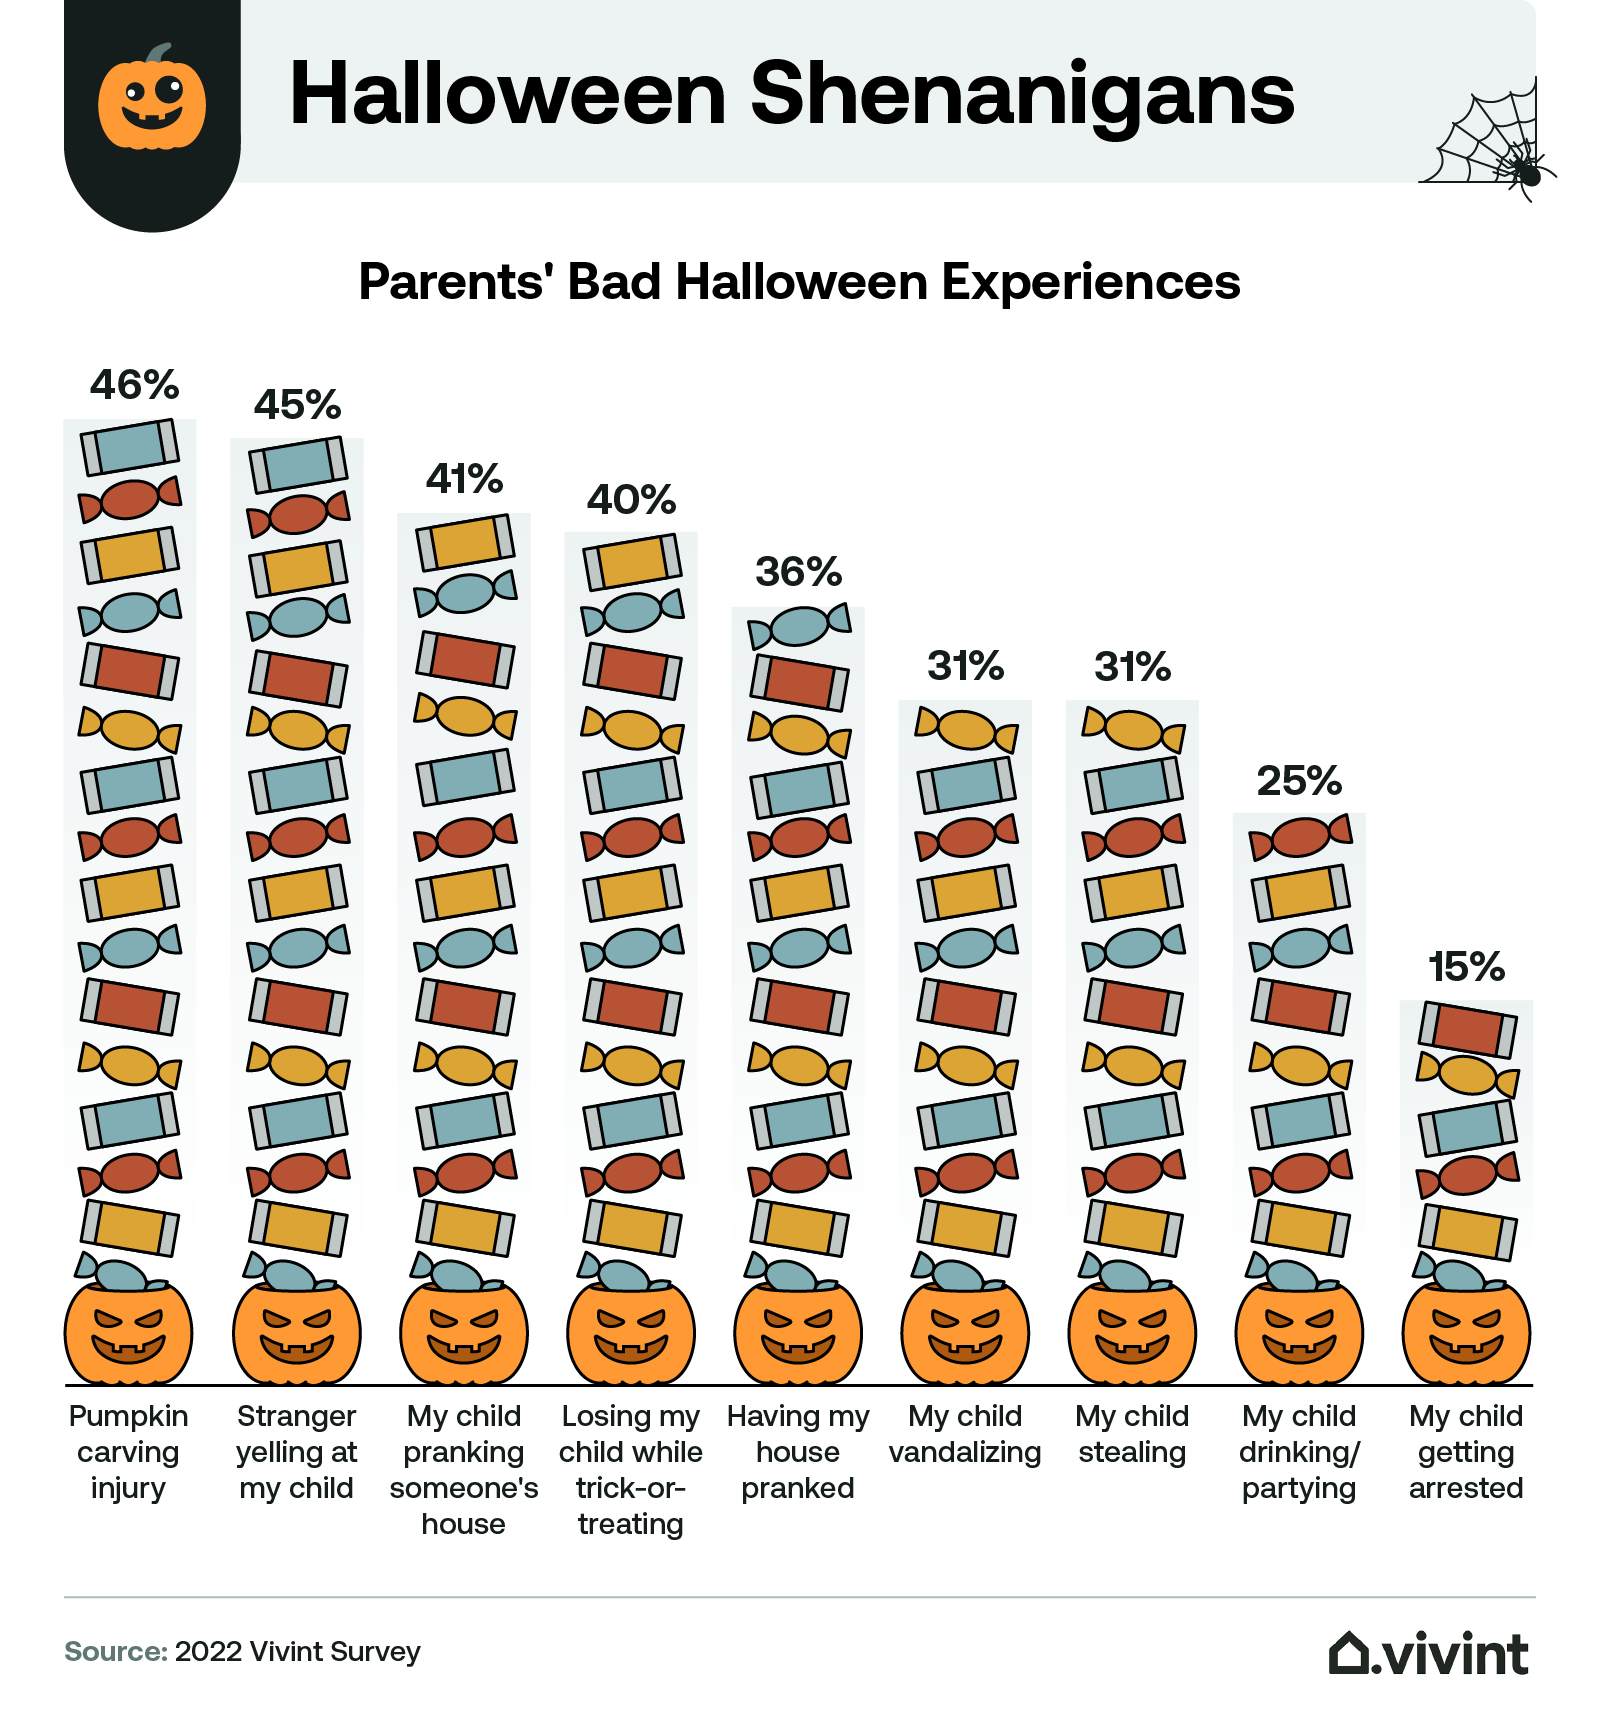 Information about which pranks parents have endured during Halloween.